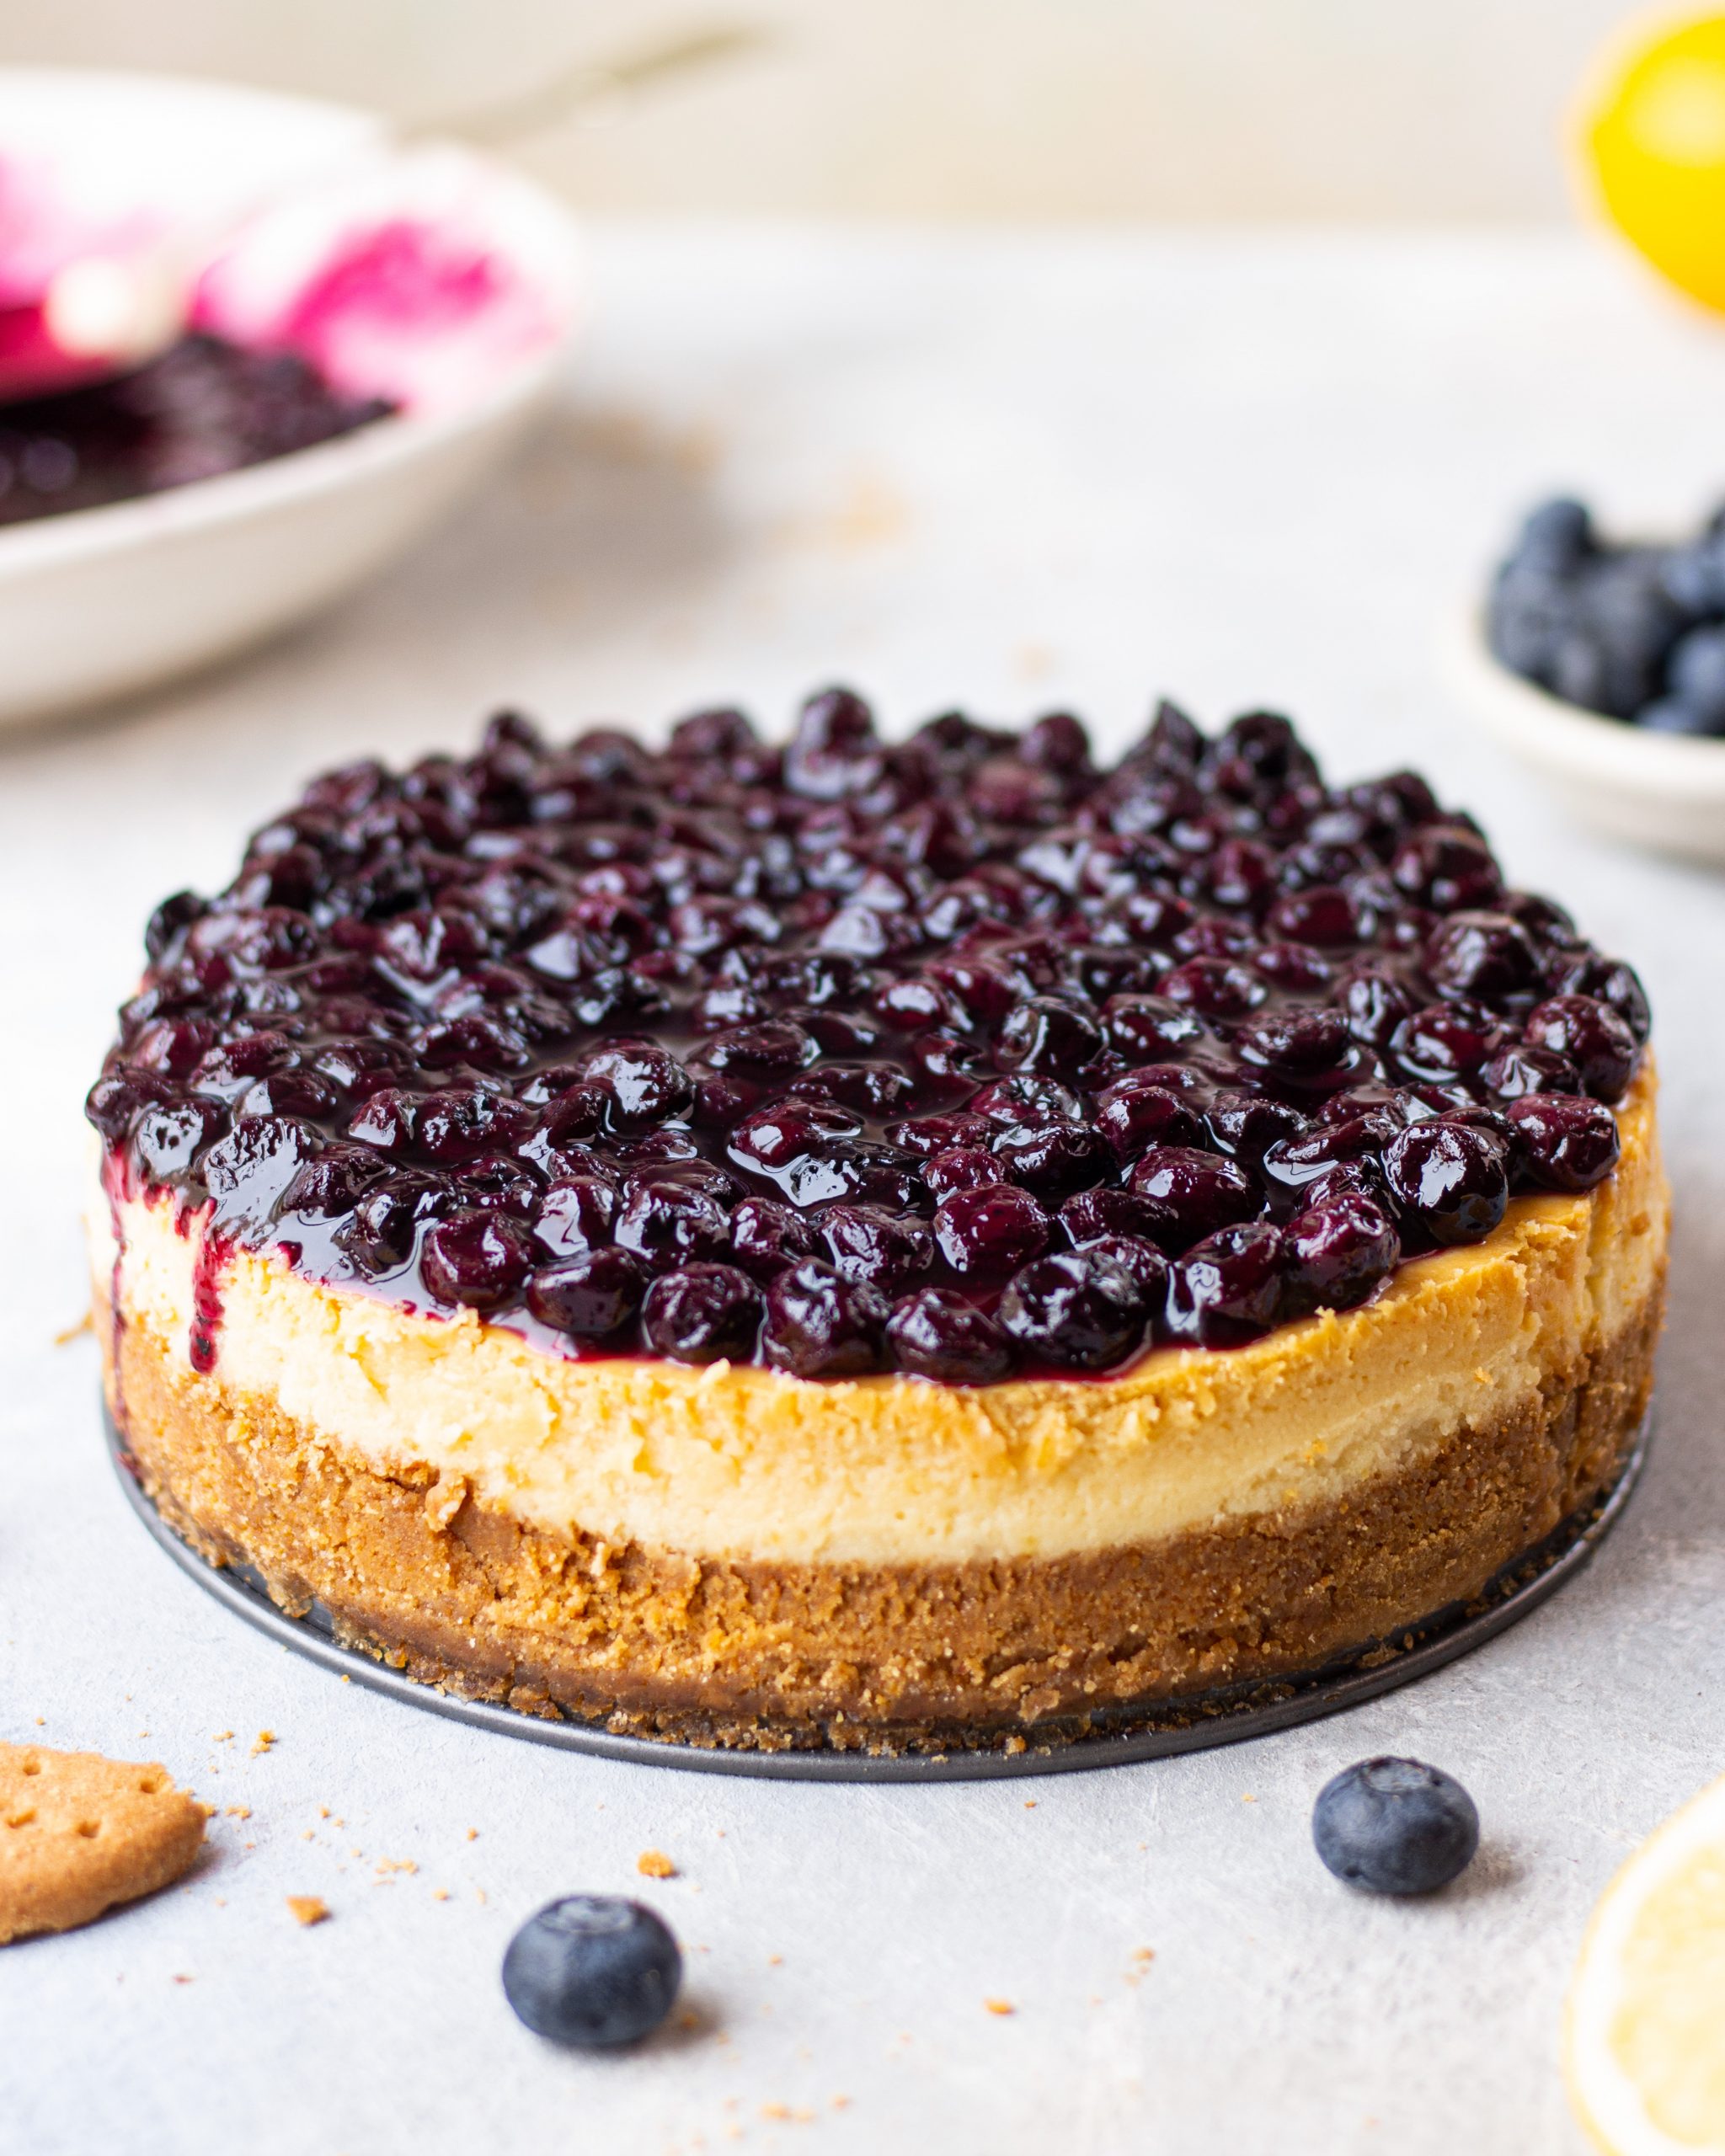 Best Cheesecake Recipe (With Video) - Sally's Baking Addiction